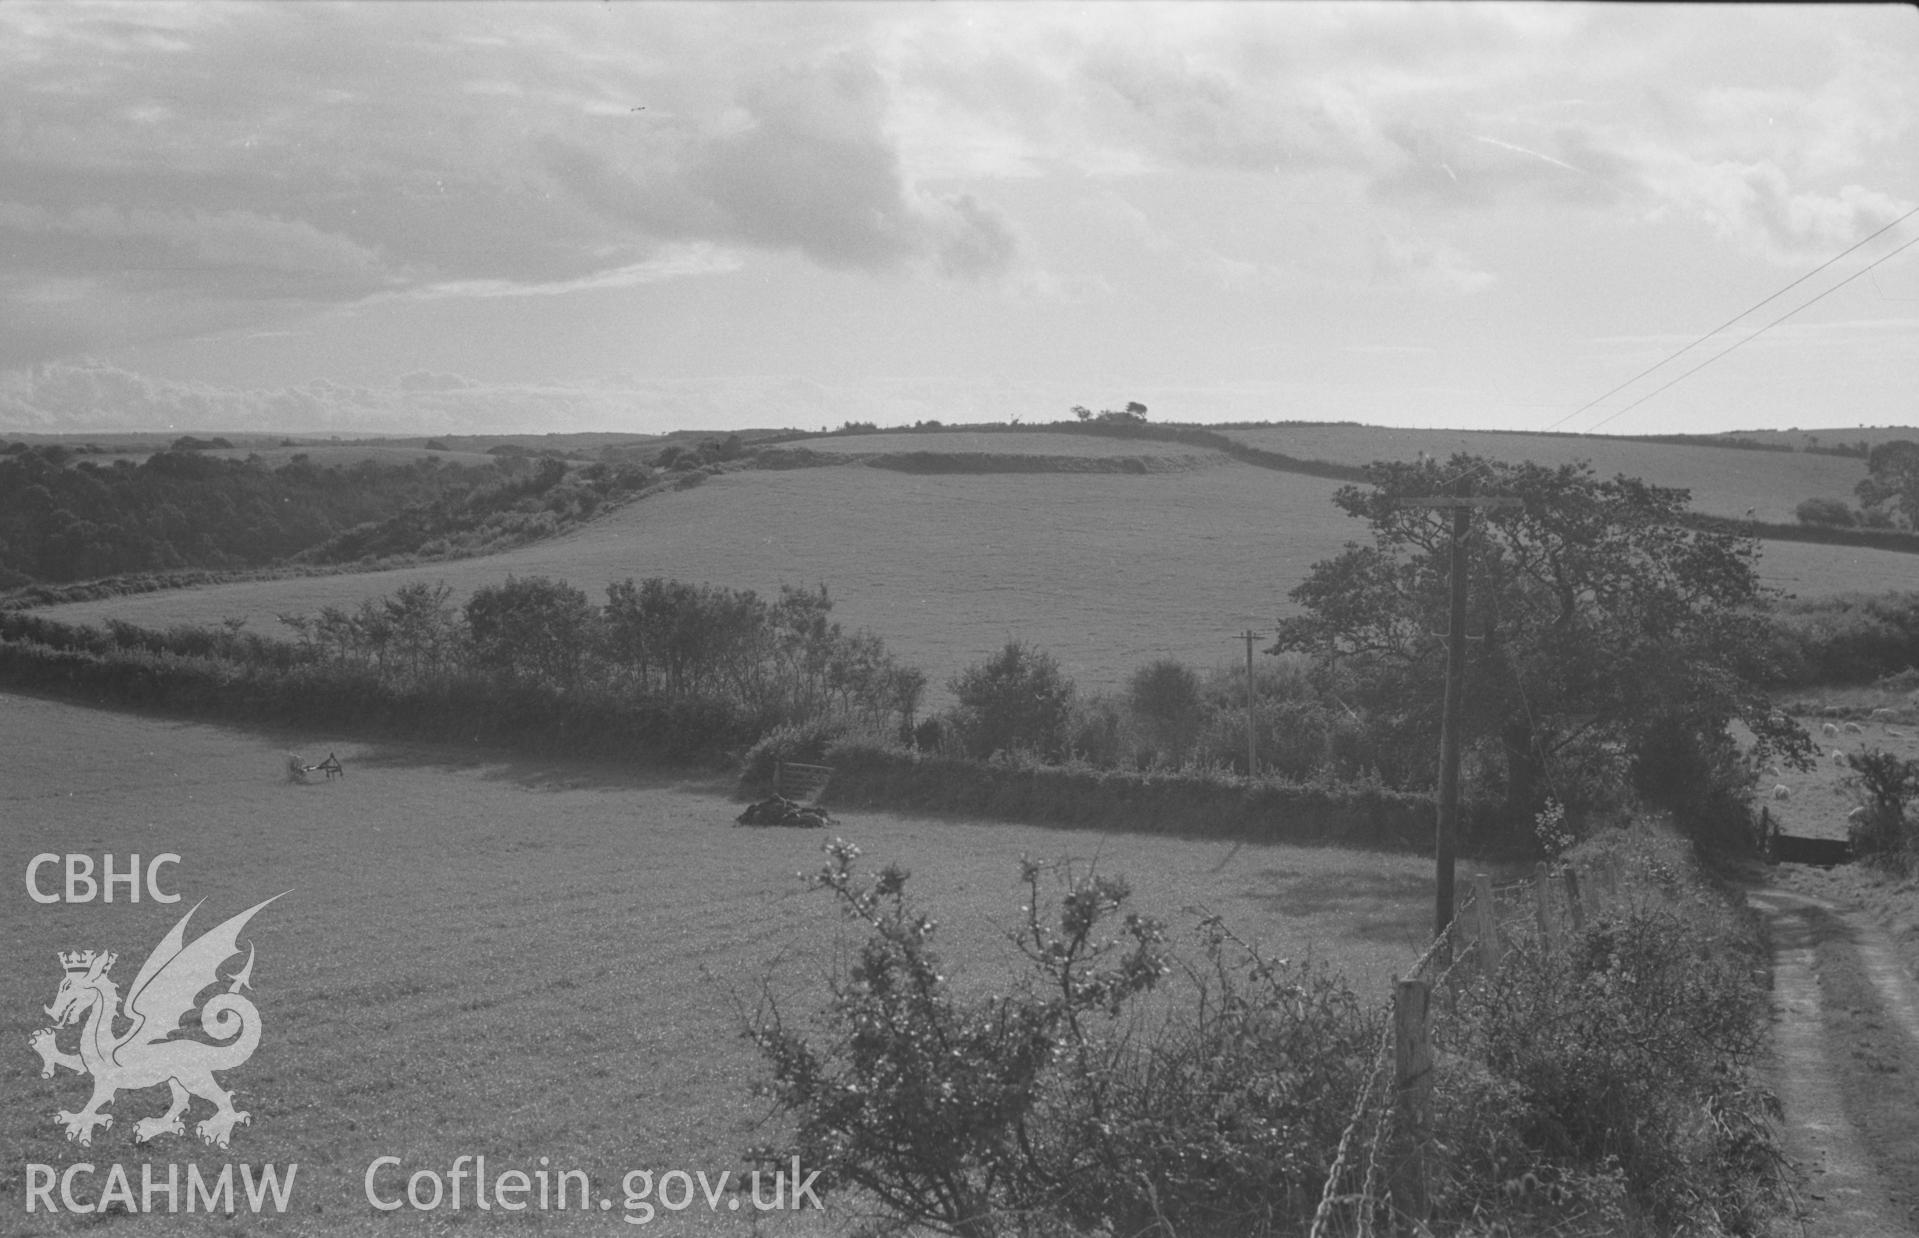 Digital copy of a black and white negative showing view of Gilfach Hael camp. Photographed by Arthur O. Chater in September 1964 from Grid Reference SN 5625 7027, looking west south west.